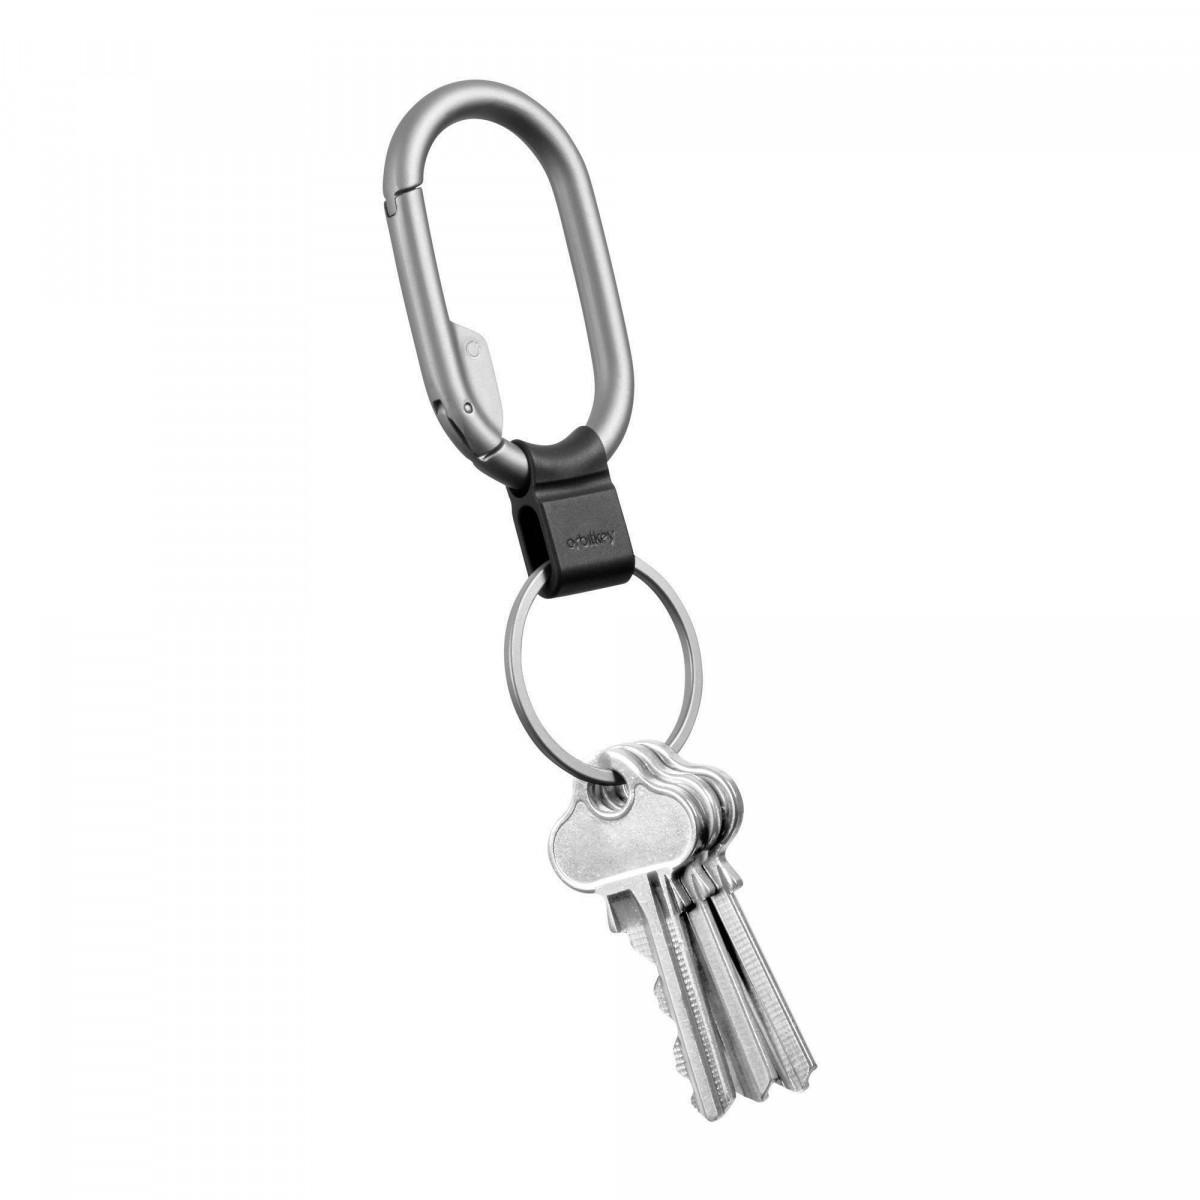 Orbitkey Quick Release Key Ring V2 review - The best simple